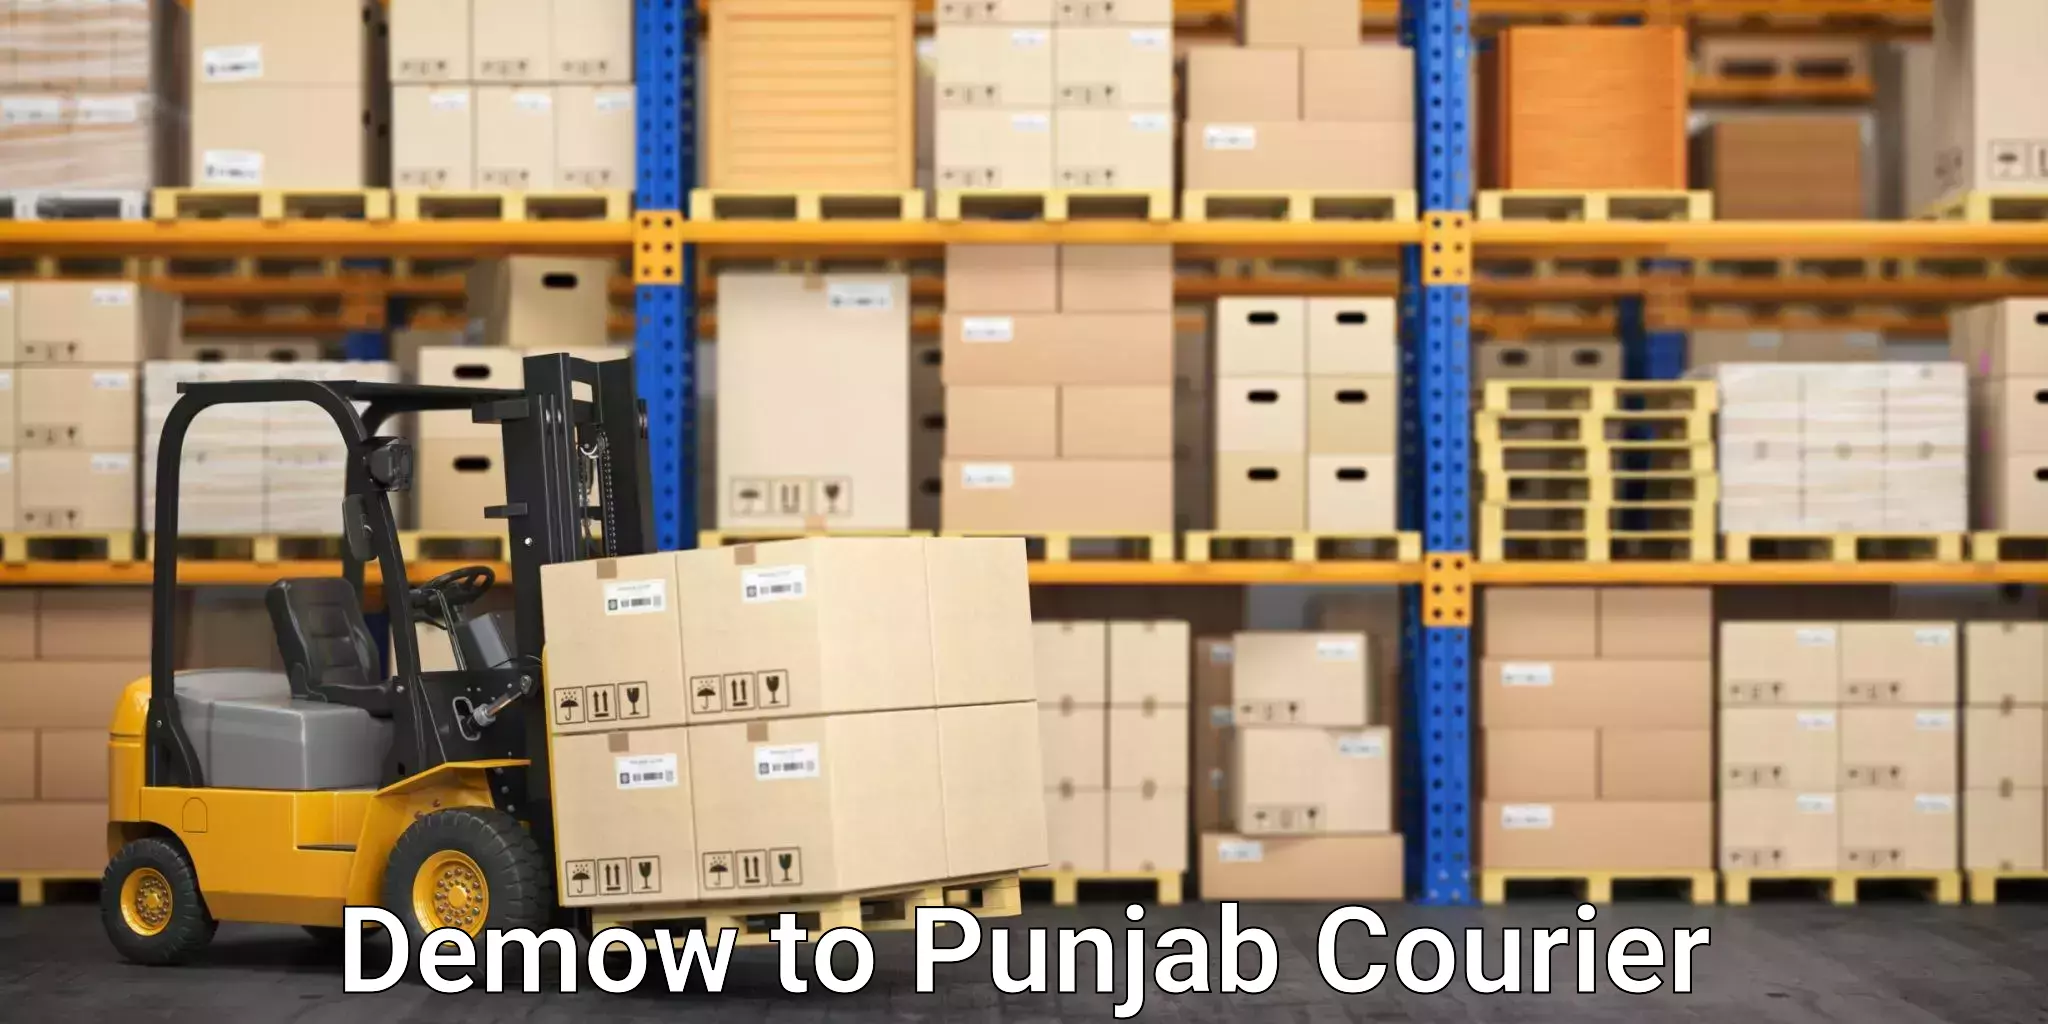 Advanced shipping technology in Demow to Central University of Punjab Bathinda